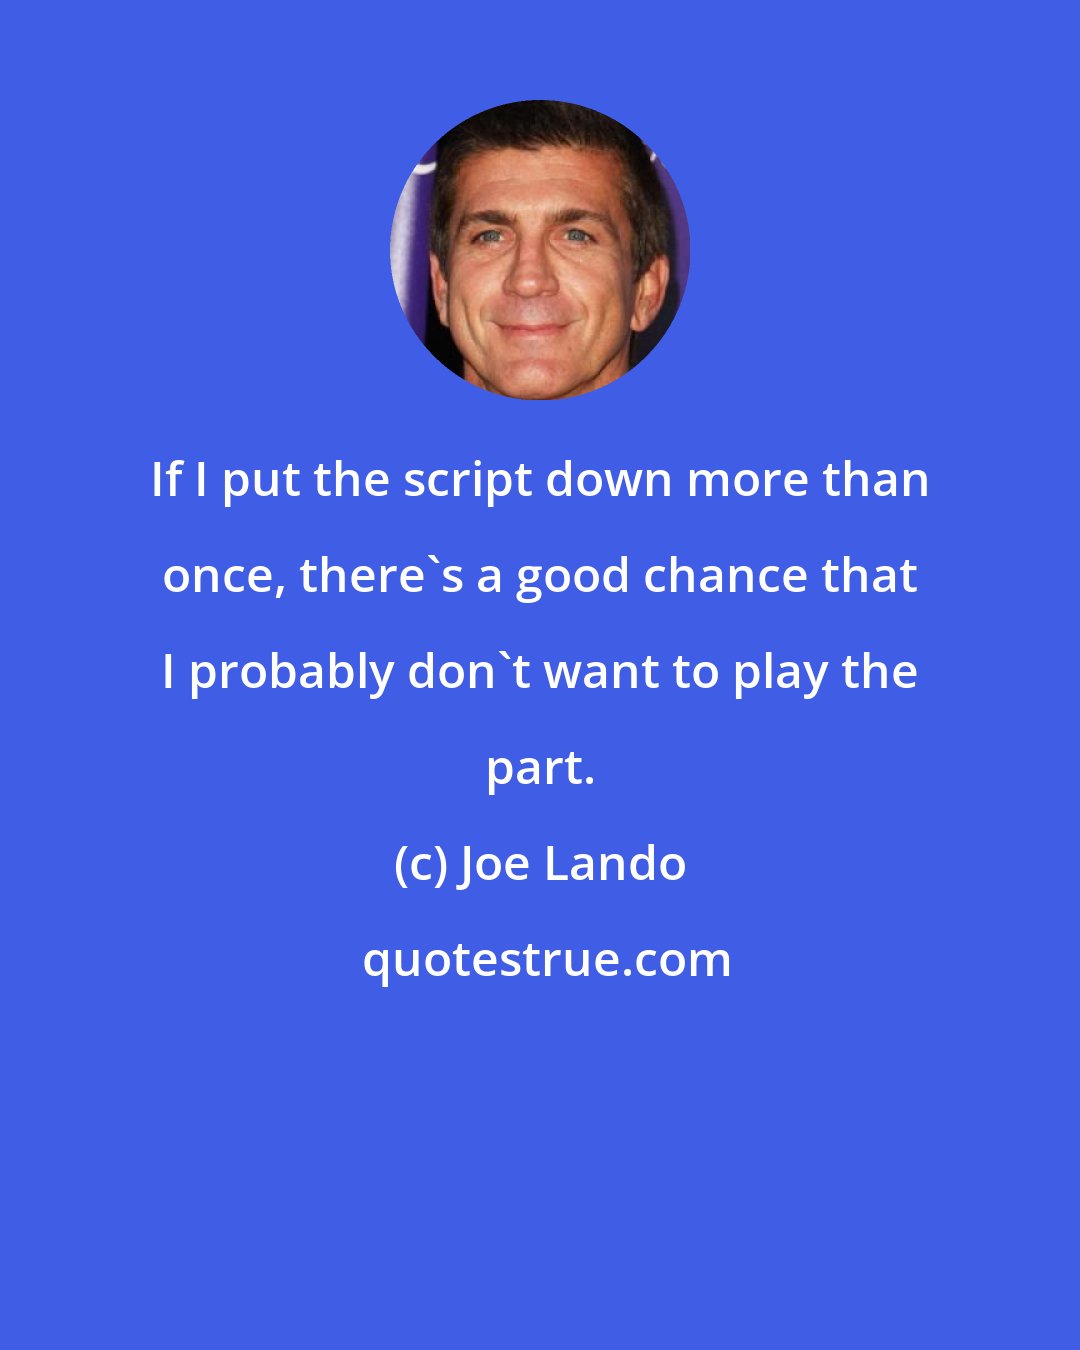 Joe Lando: If I put the script down more than once, there's a good chance that I probably don't want to play the part.